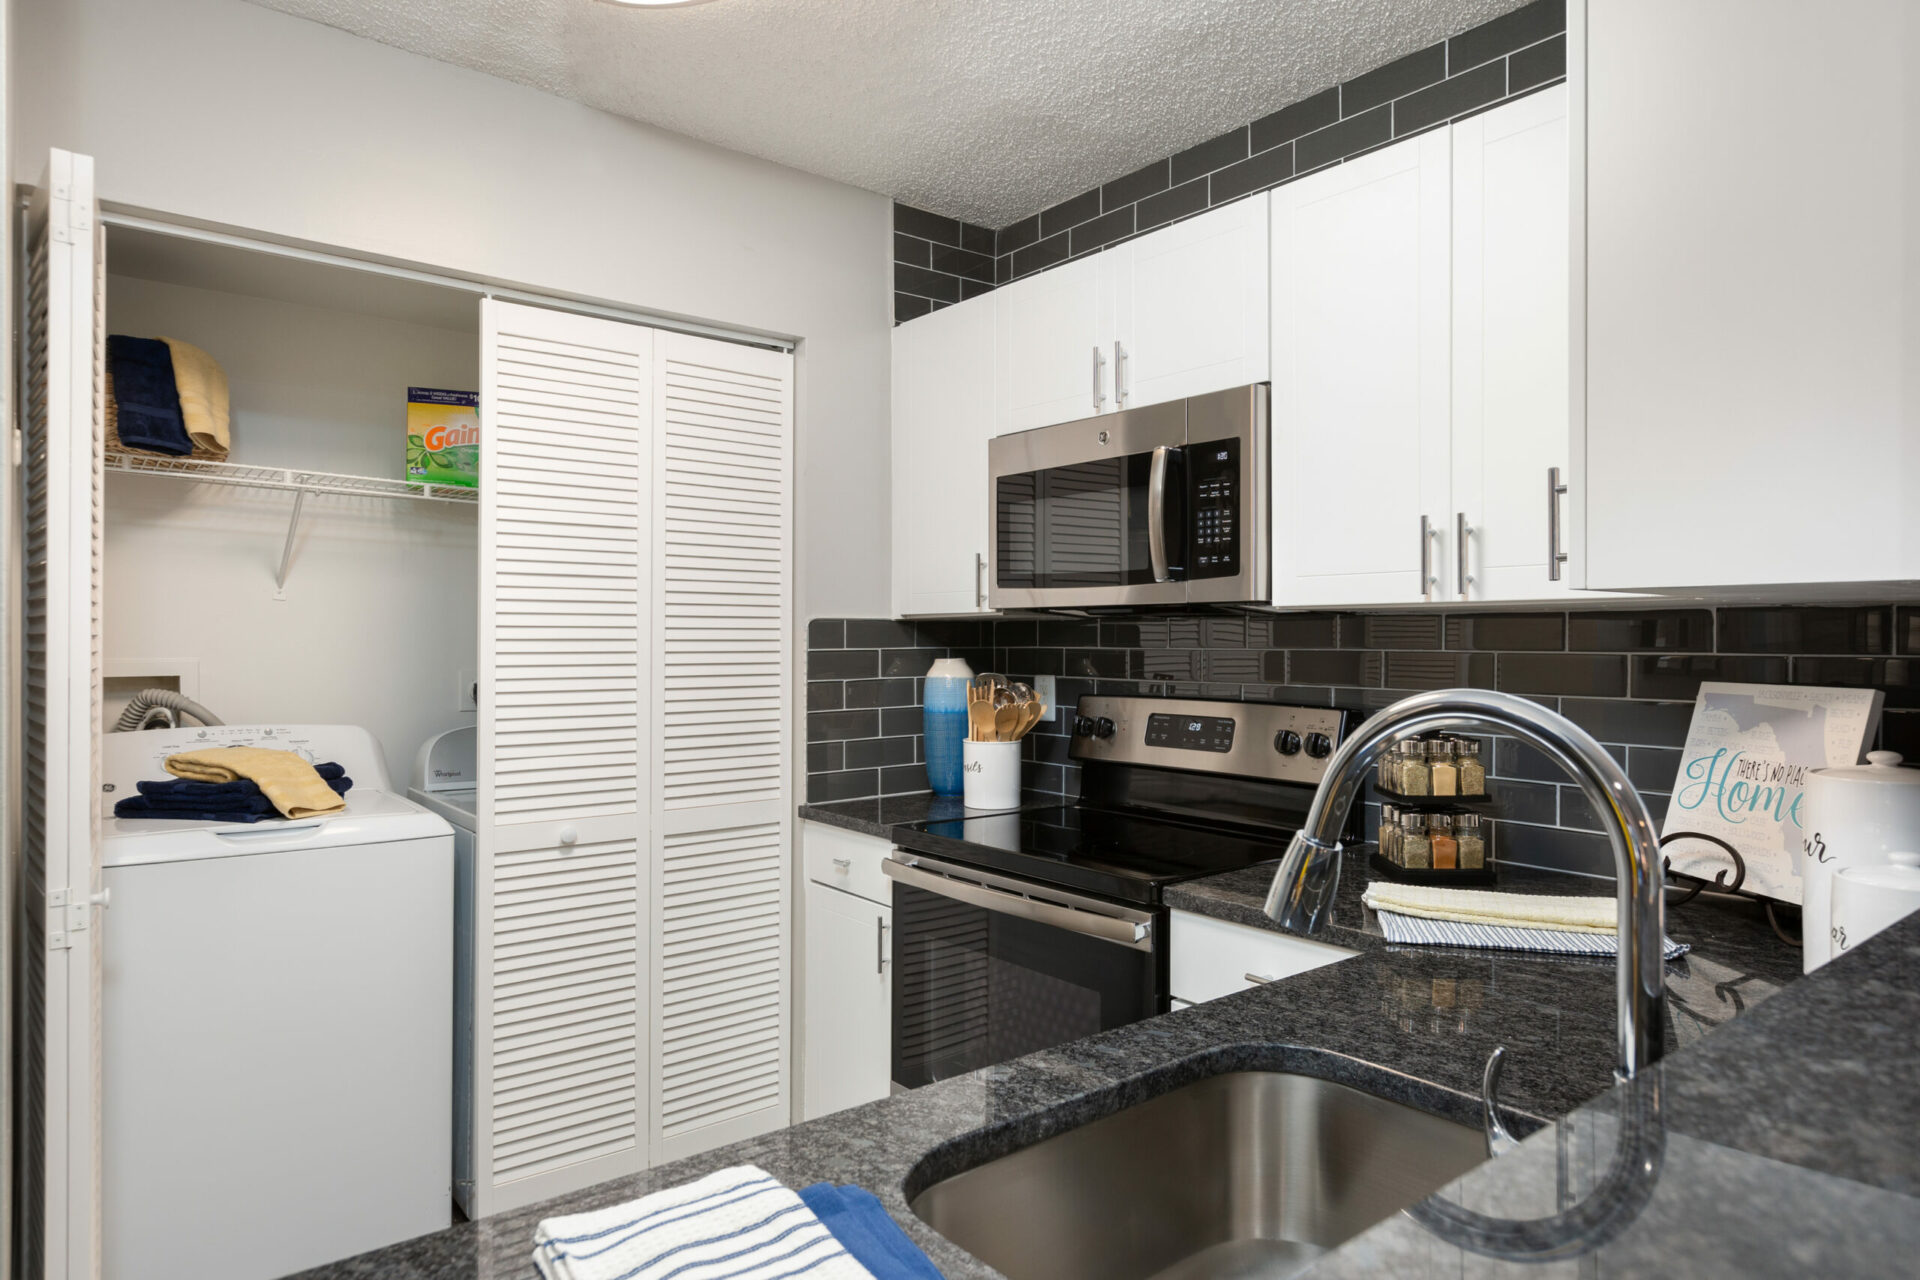 Kitchen with stainless steel appliances and separate washer and dryer section.